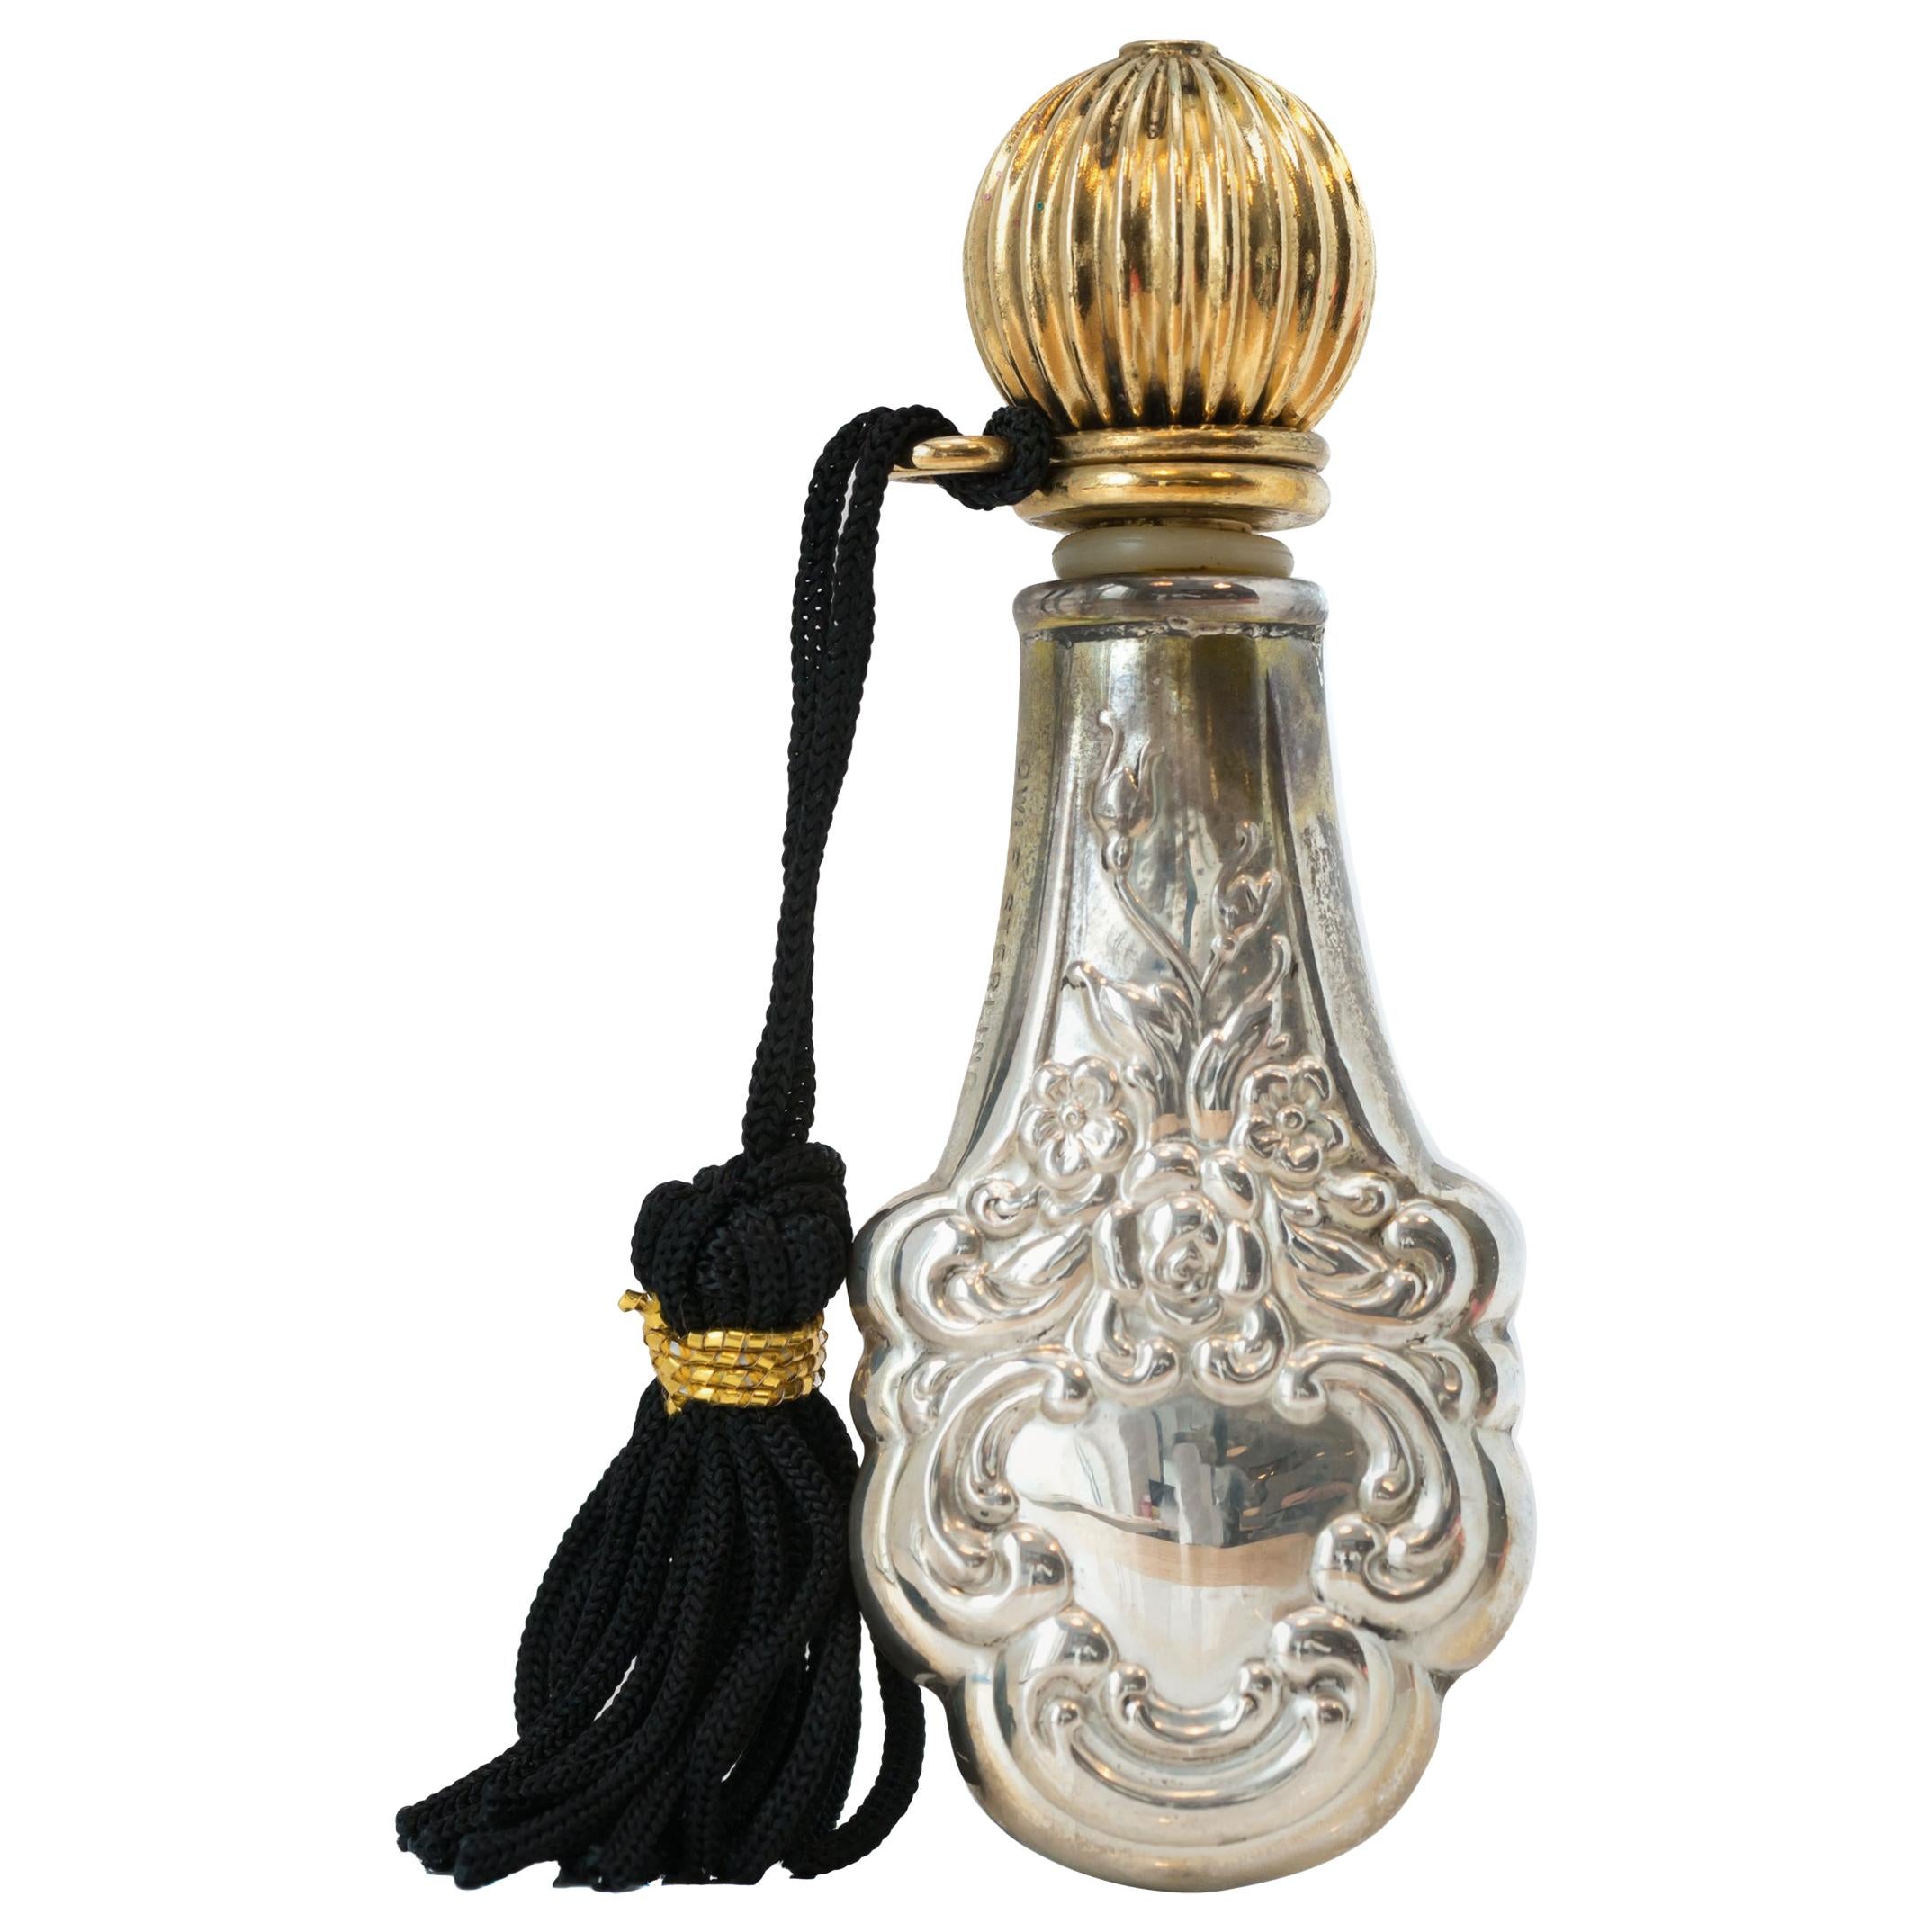 1920s Towle Sterling Silver Perfume Bottle with Tassle